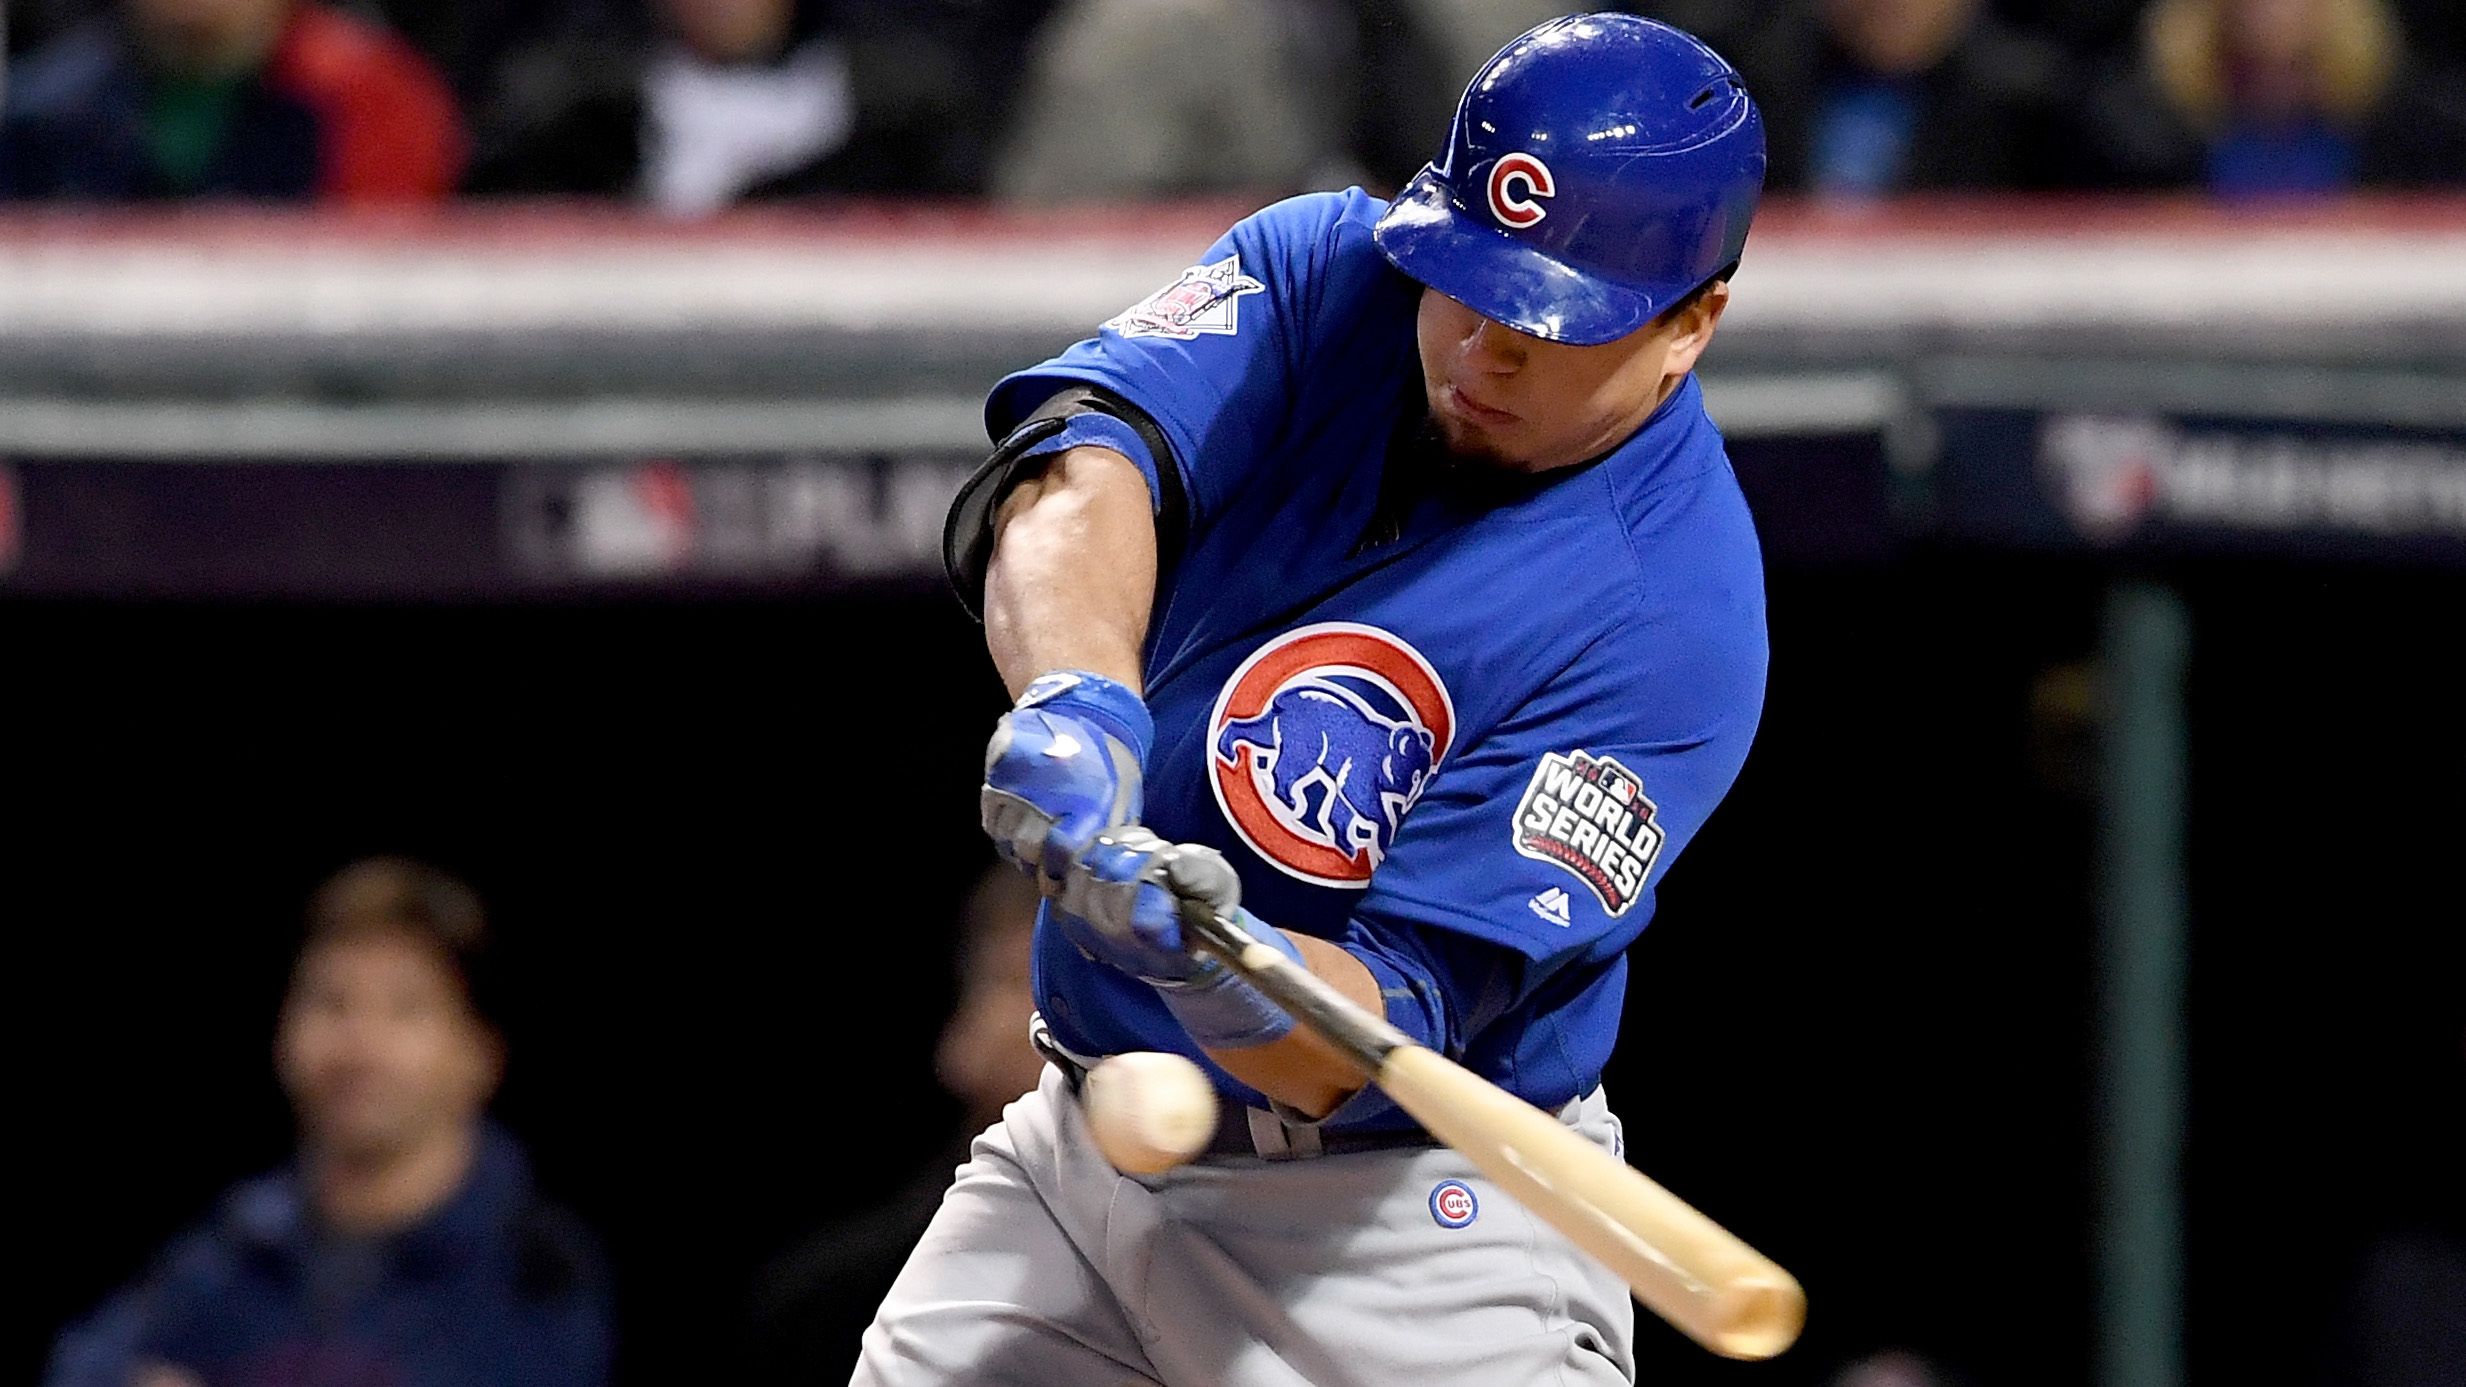 2016: World Series: Cubs Kyle Schwarber not cleared to play